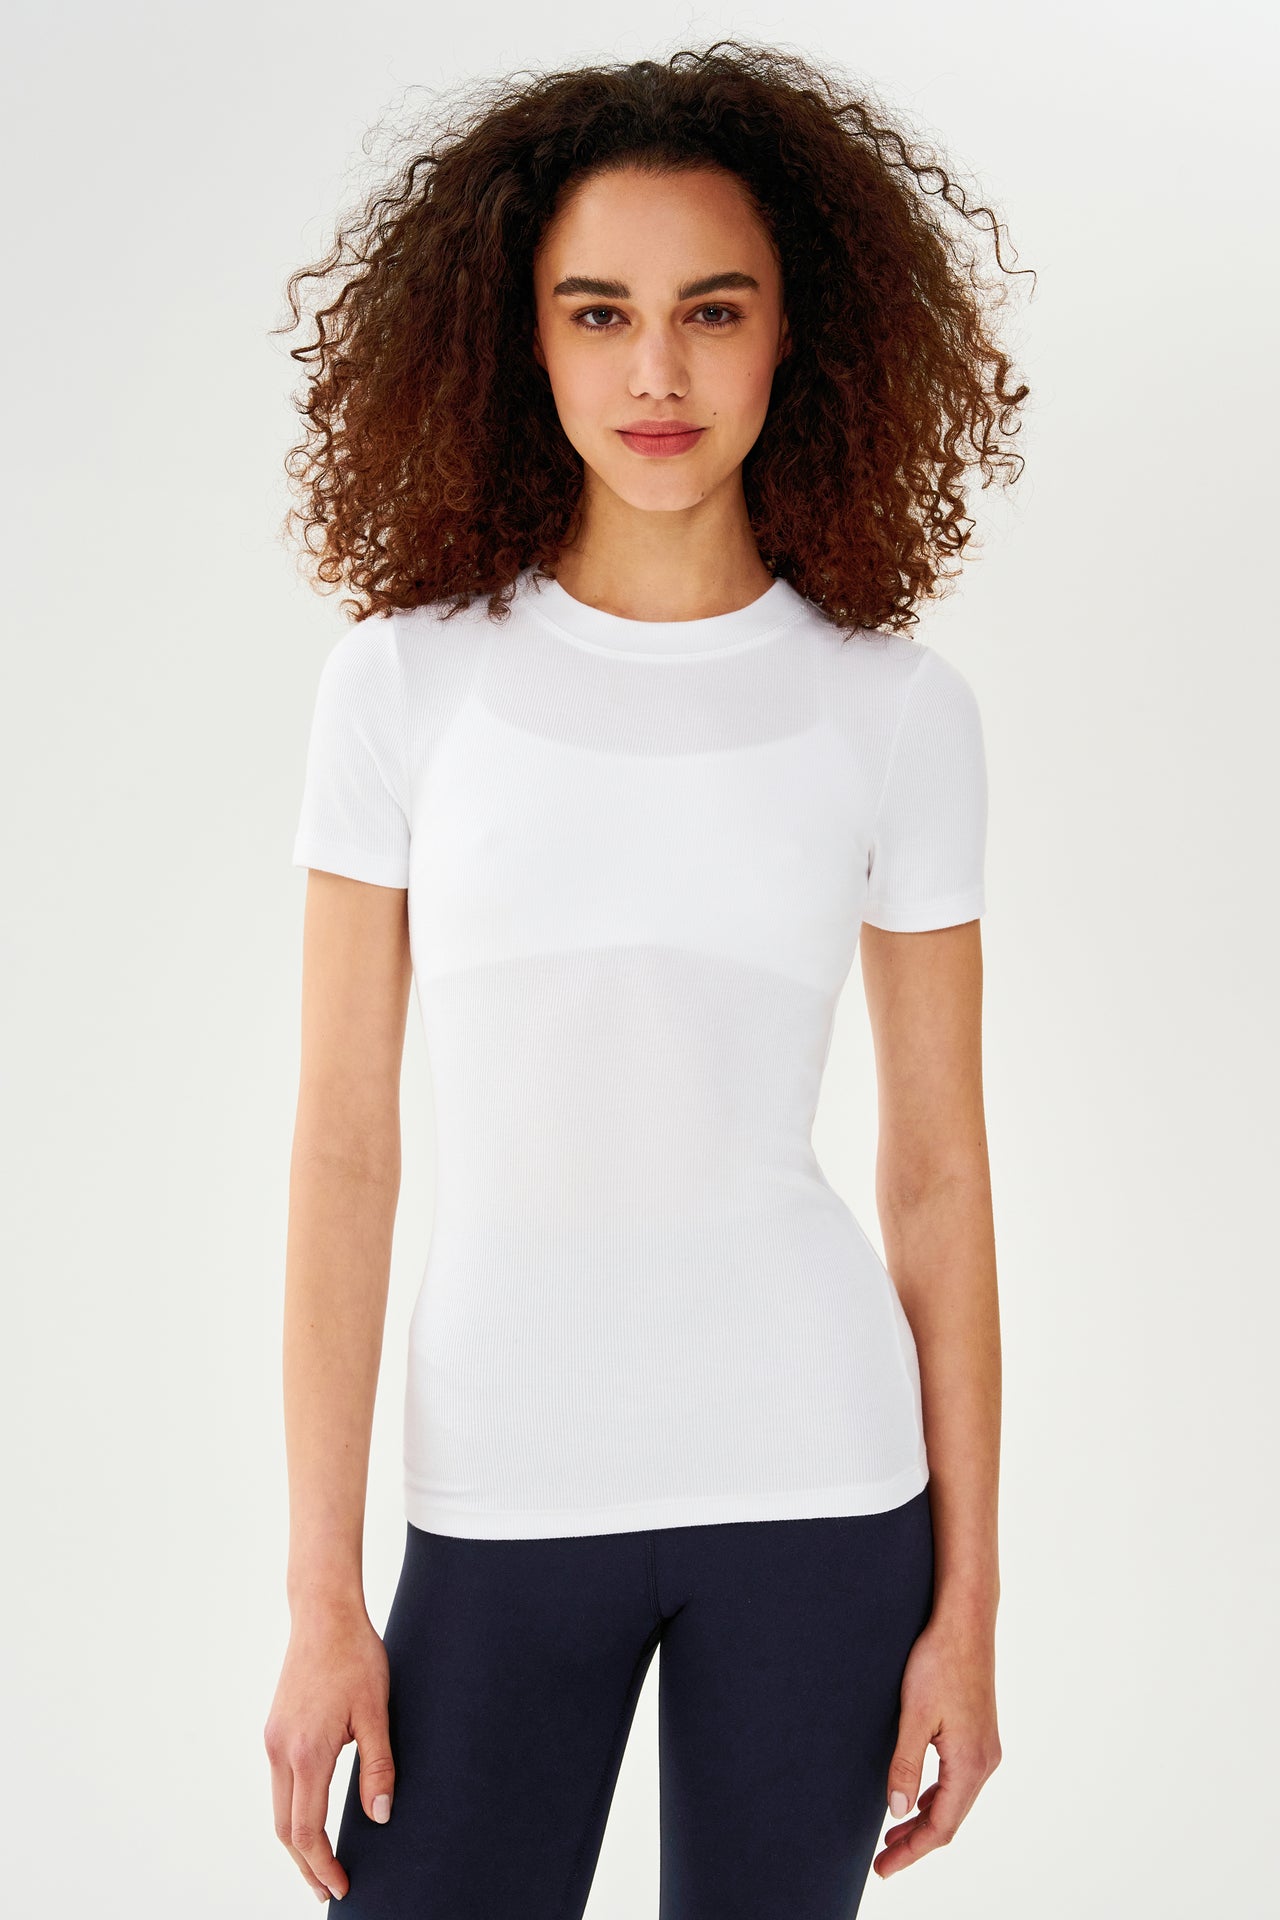 A woman wearing a SPLITS59 Louise Rib Short Sleeve in White and leggings for yoga.